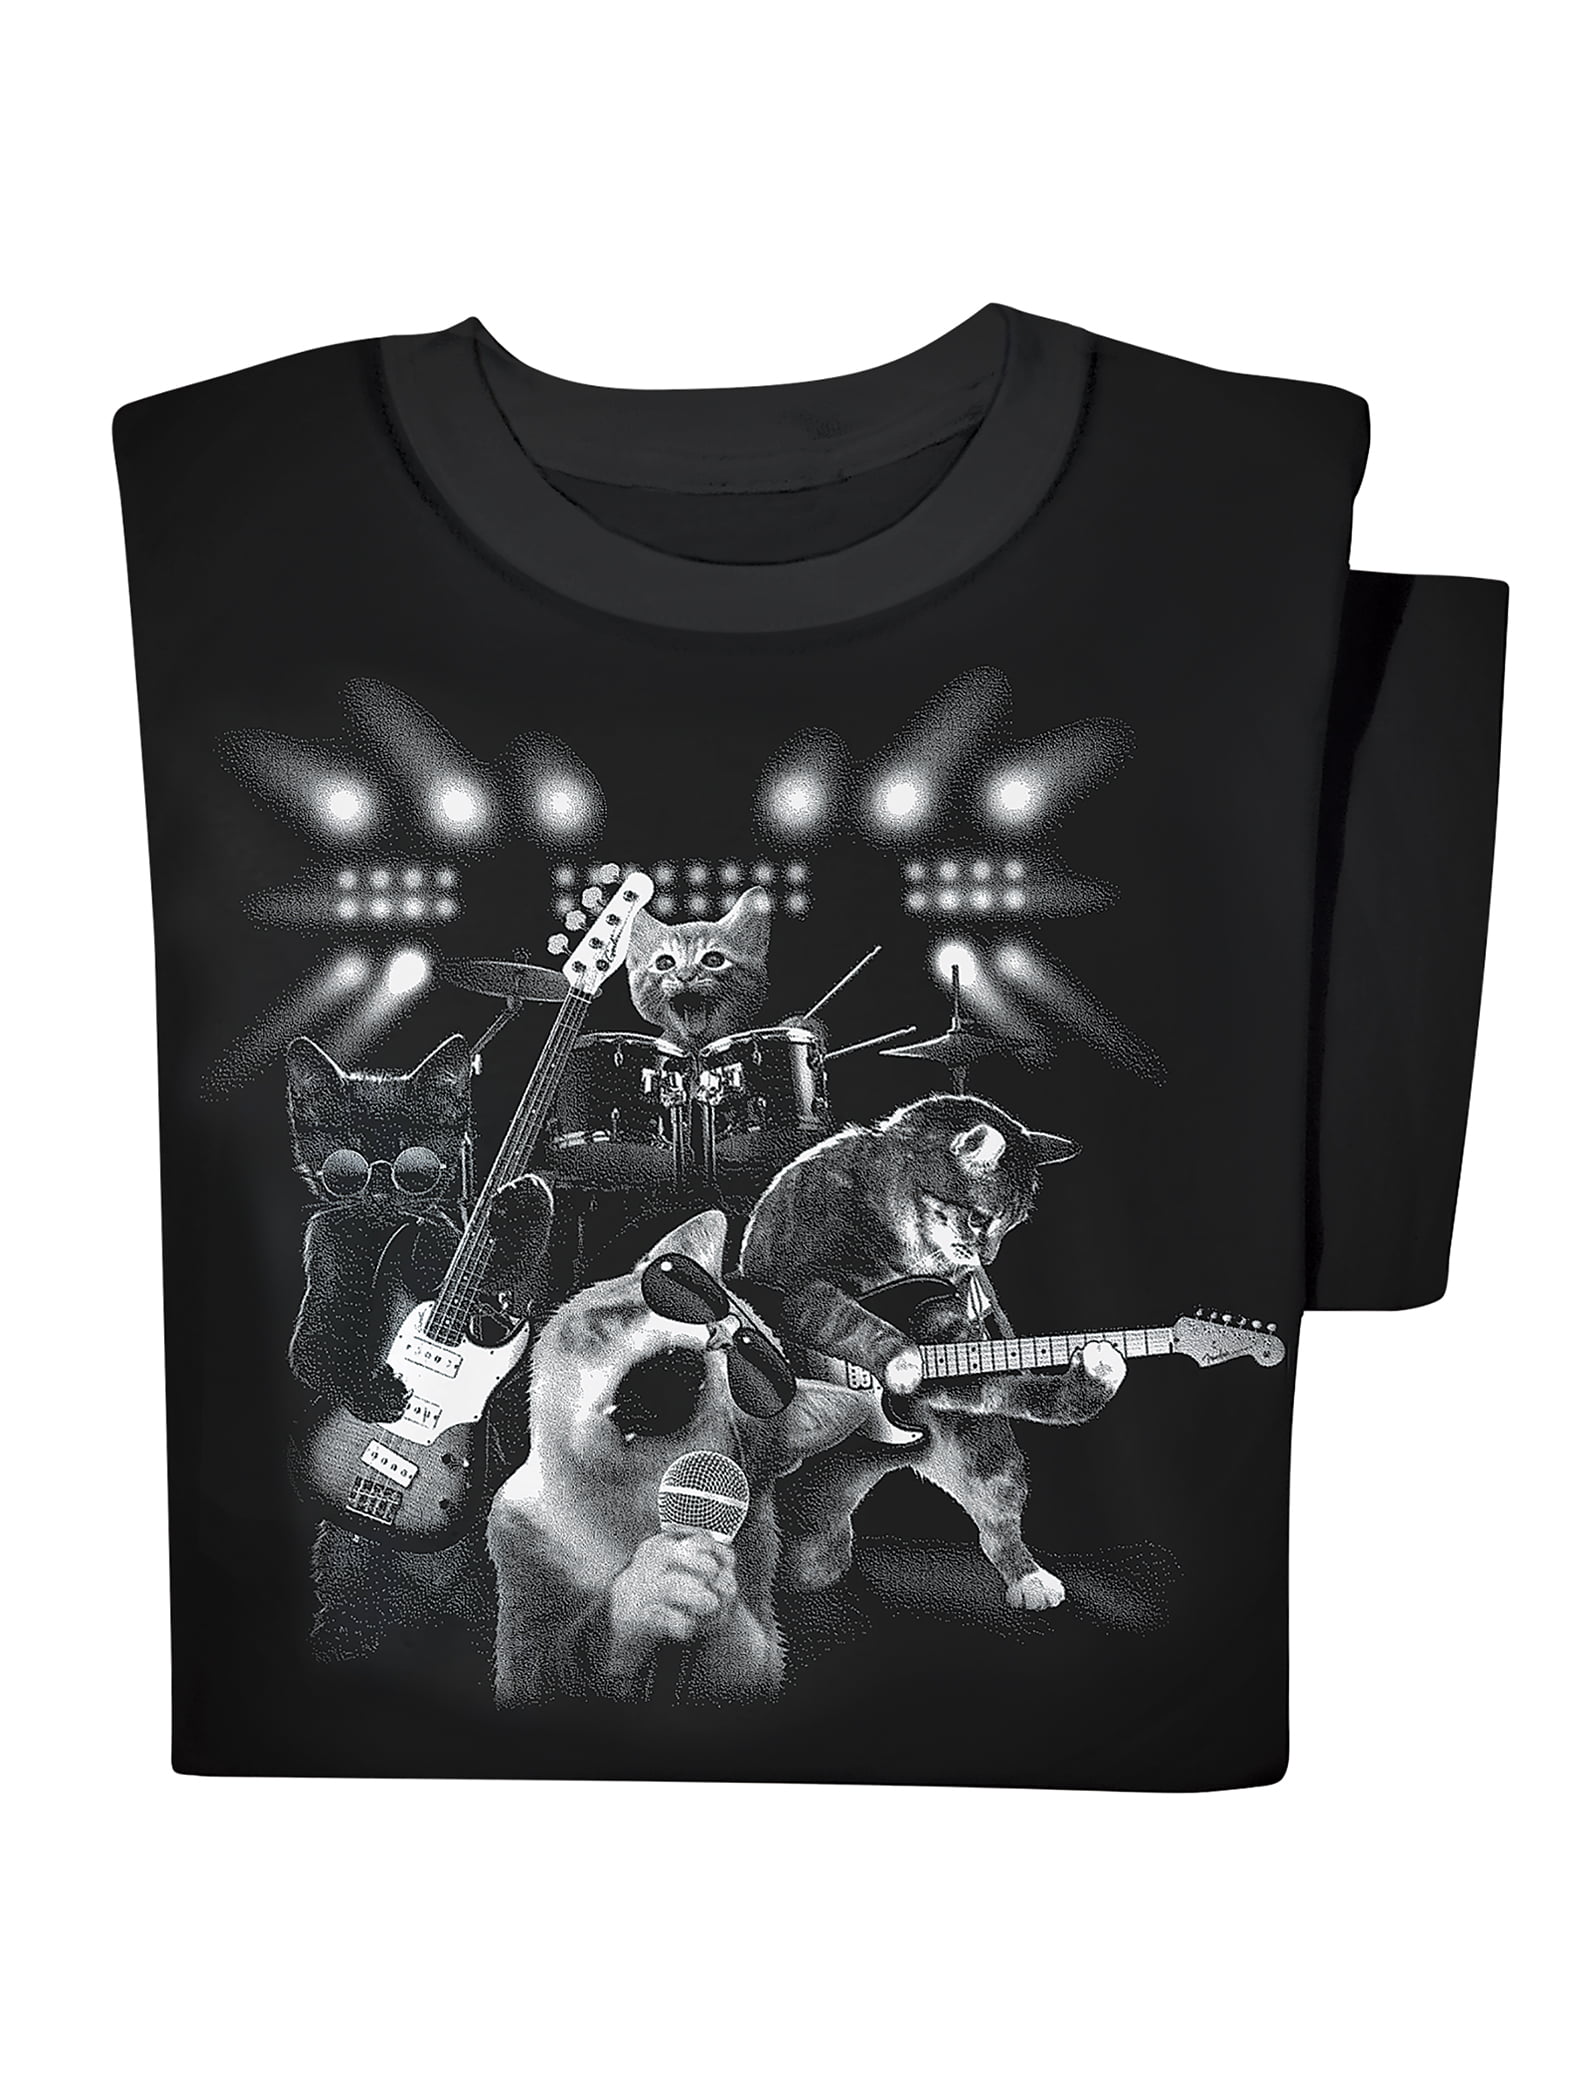 Cat T-shirt gray and white rock'n'roll cat organic cotton unisex